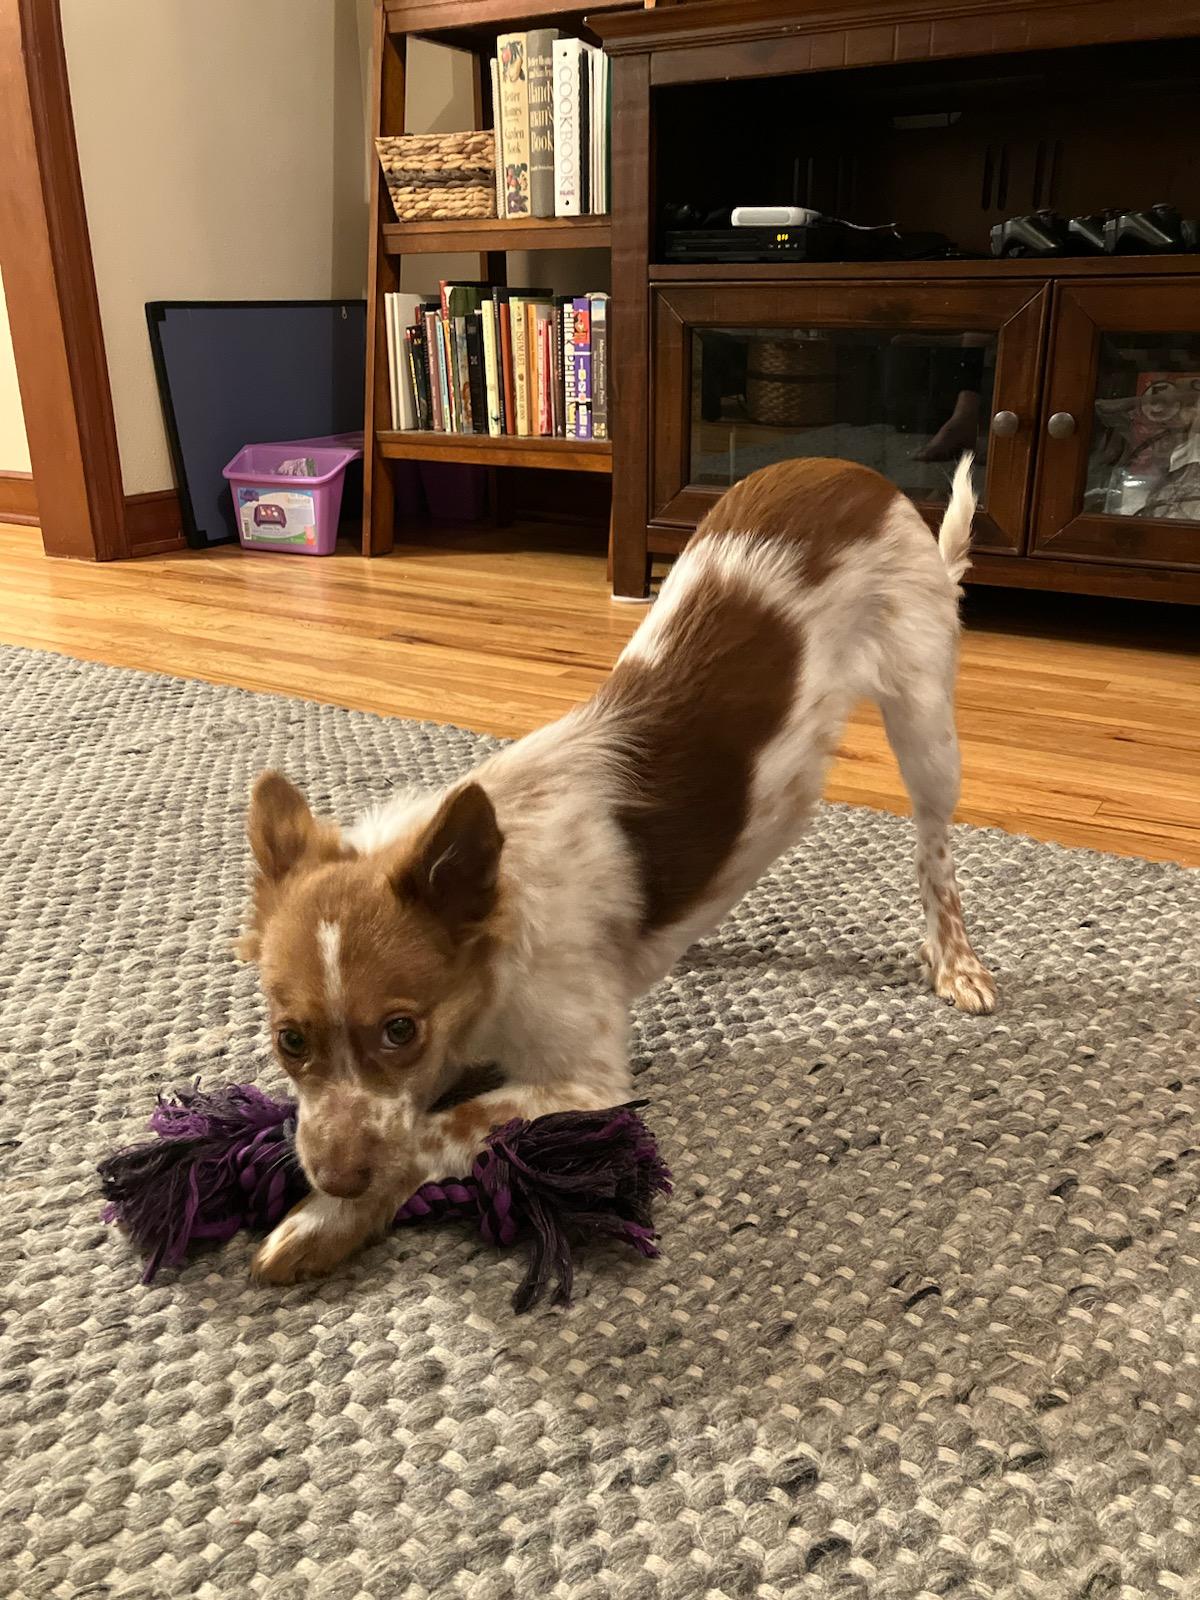 A small spotted white and brown dog plays with a purple rope toy. The dog is crouched in a playful stance with its back end up.